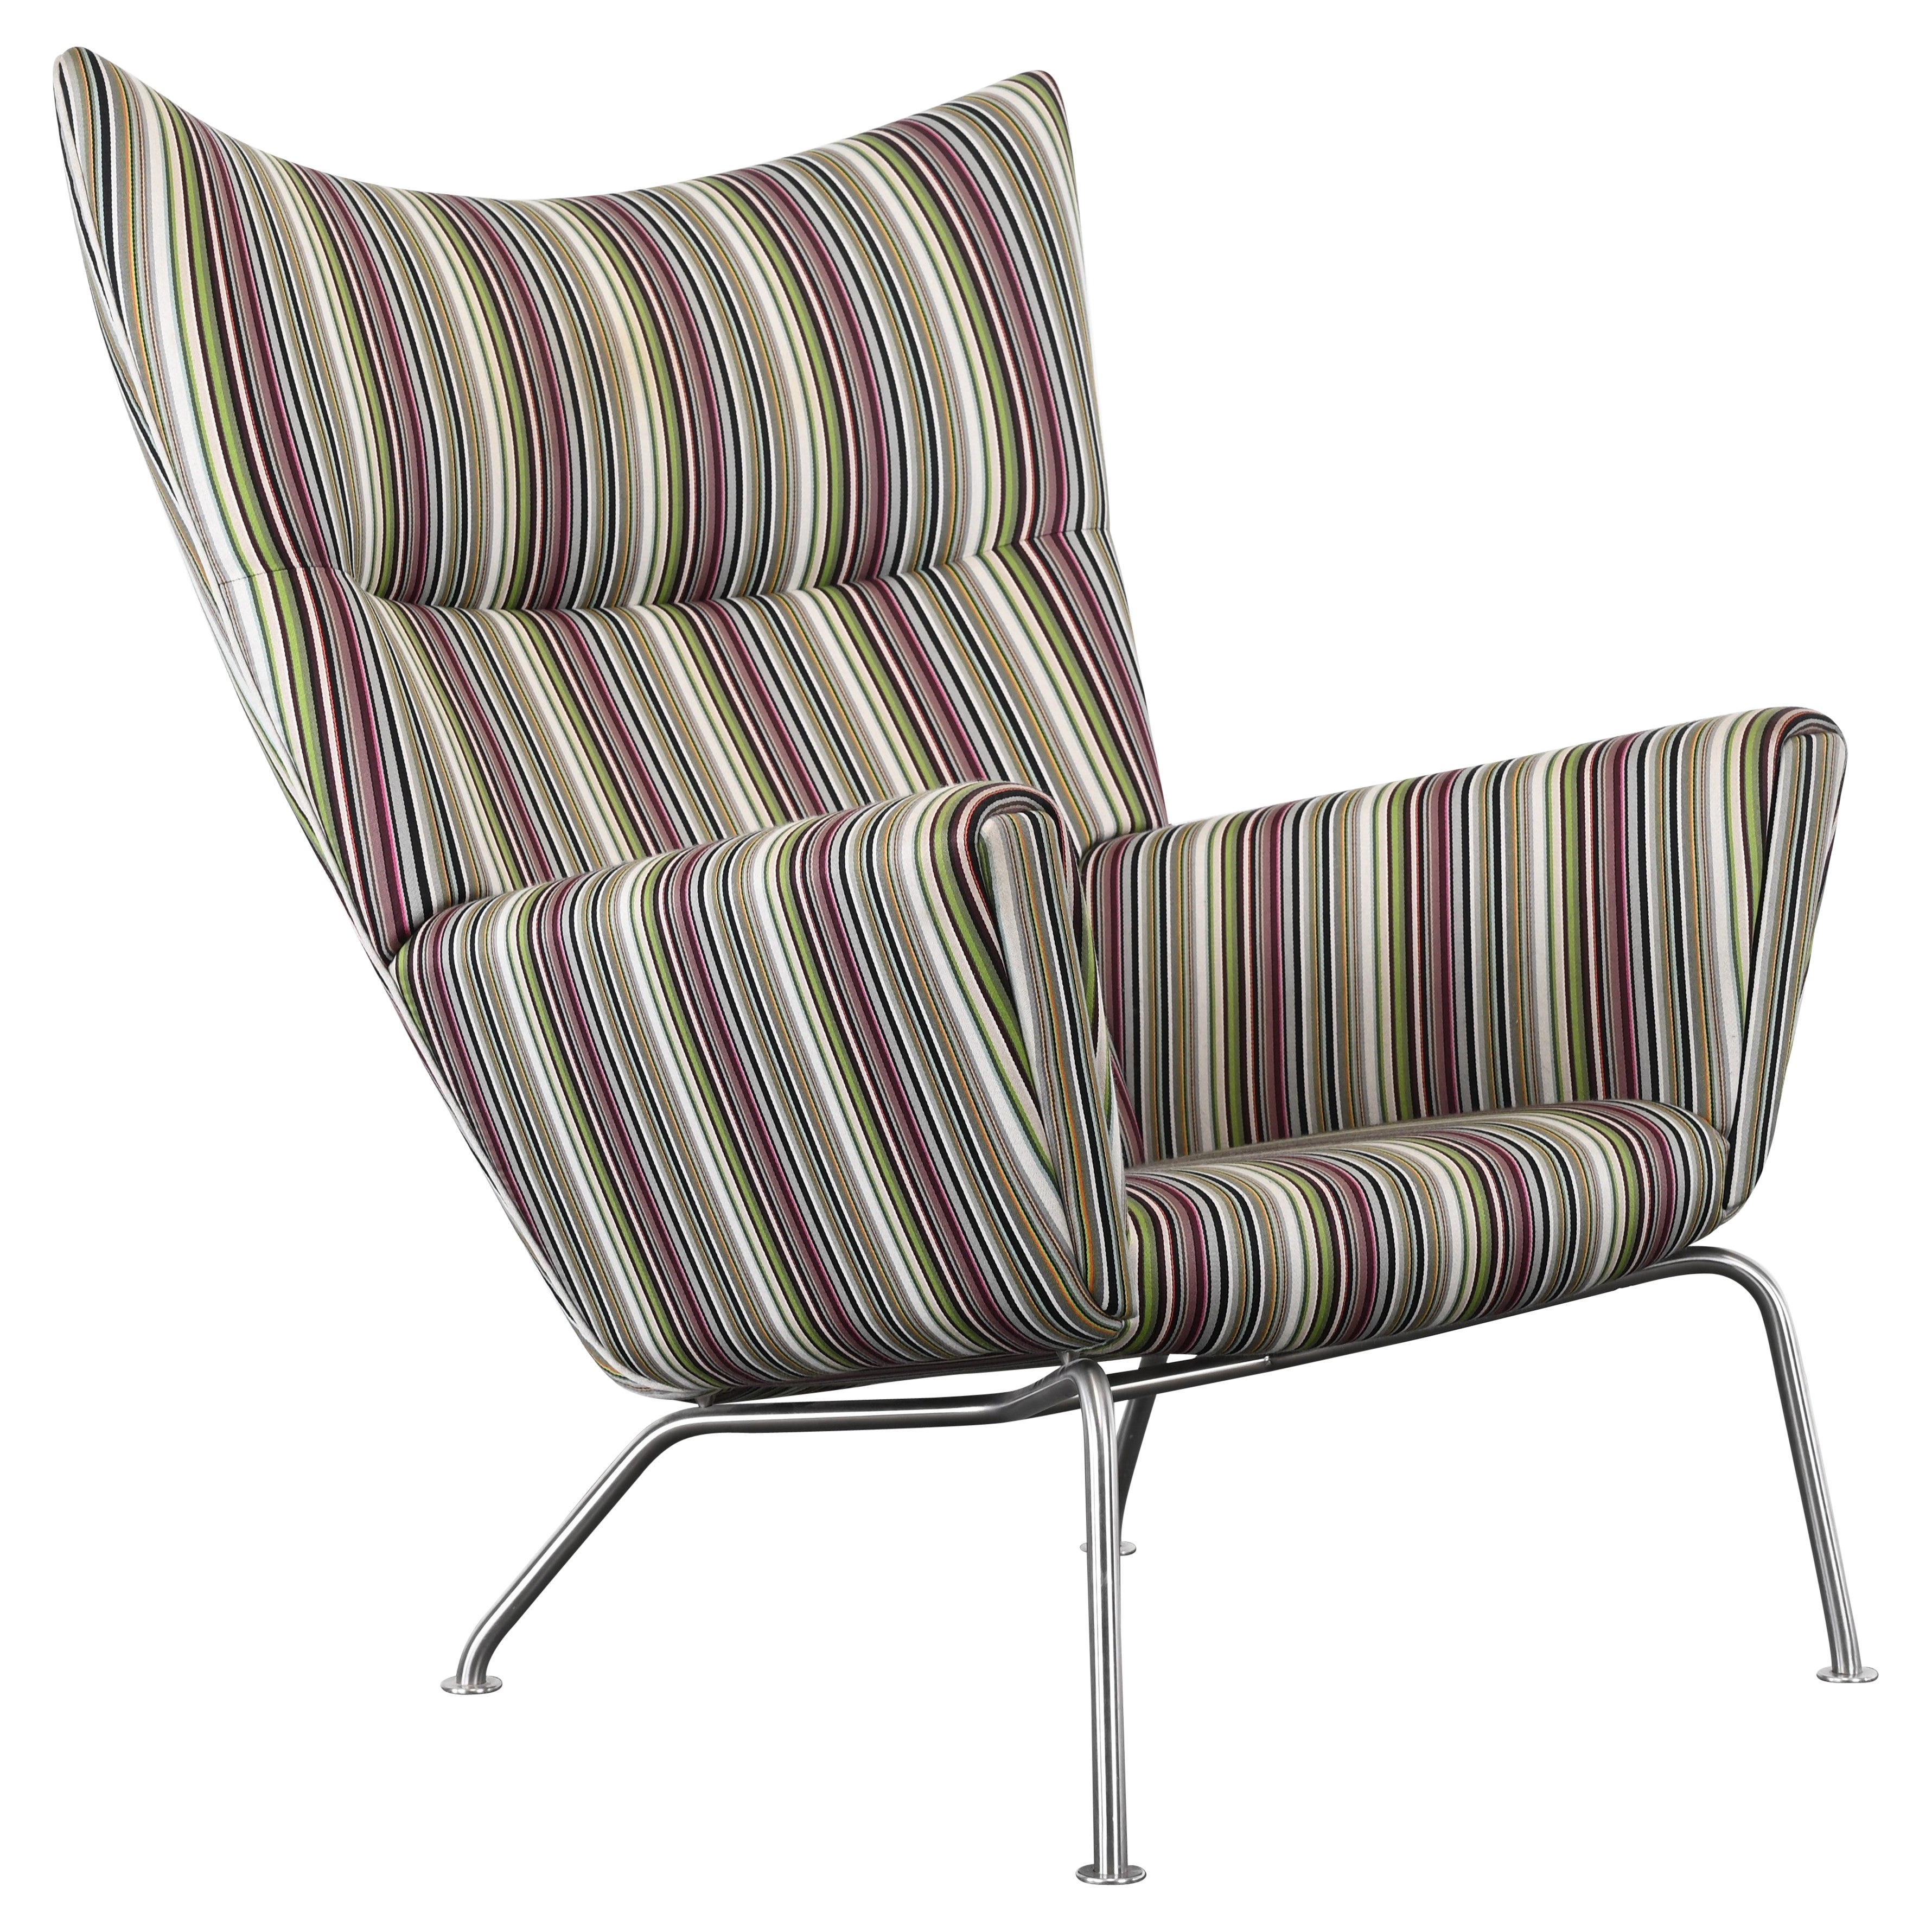 CH445 Wing Lounge Chair Designed by Hans Wegner for Carl Hansen & Son, 2006 For Sale